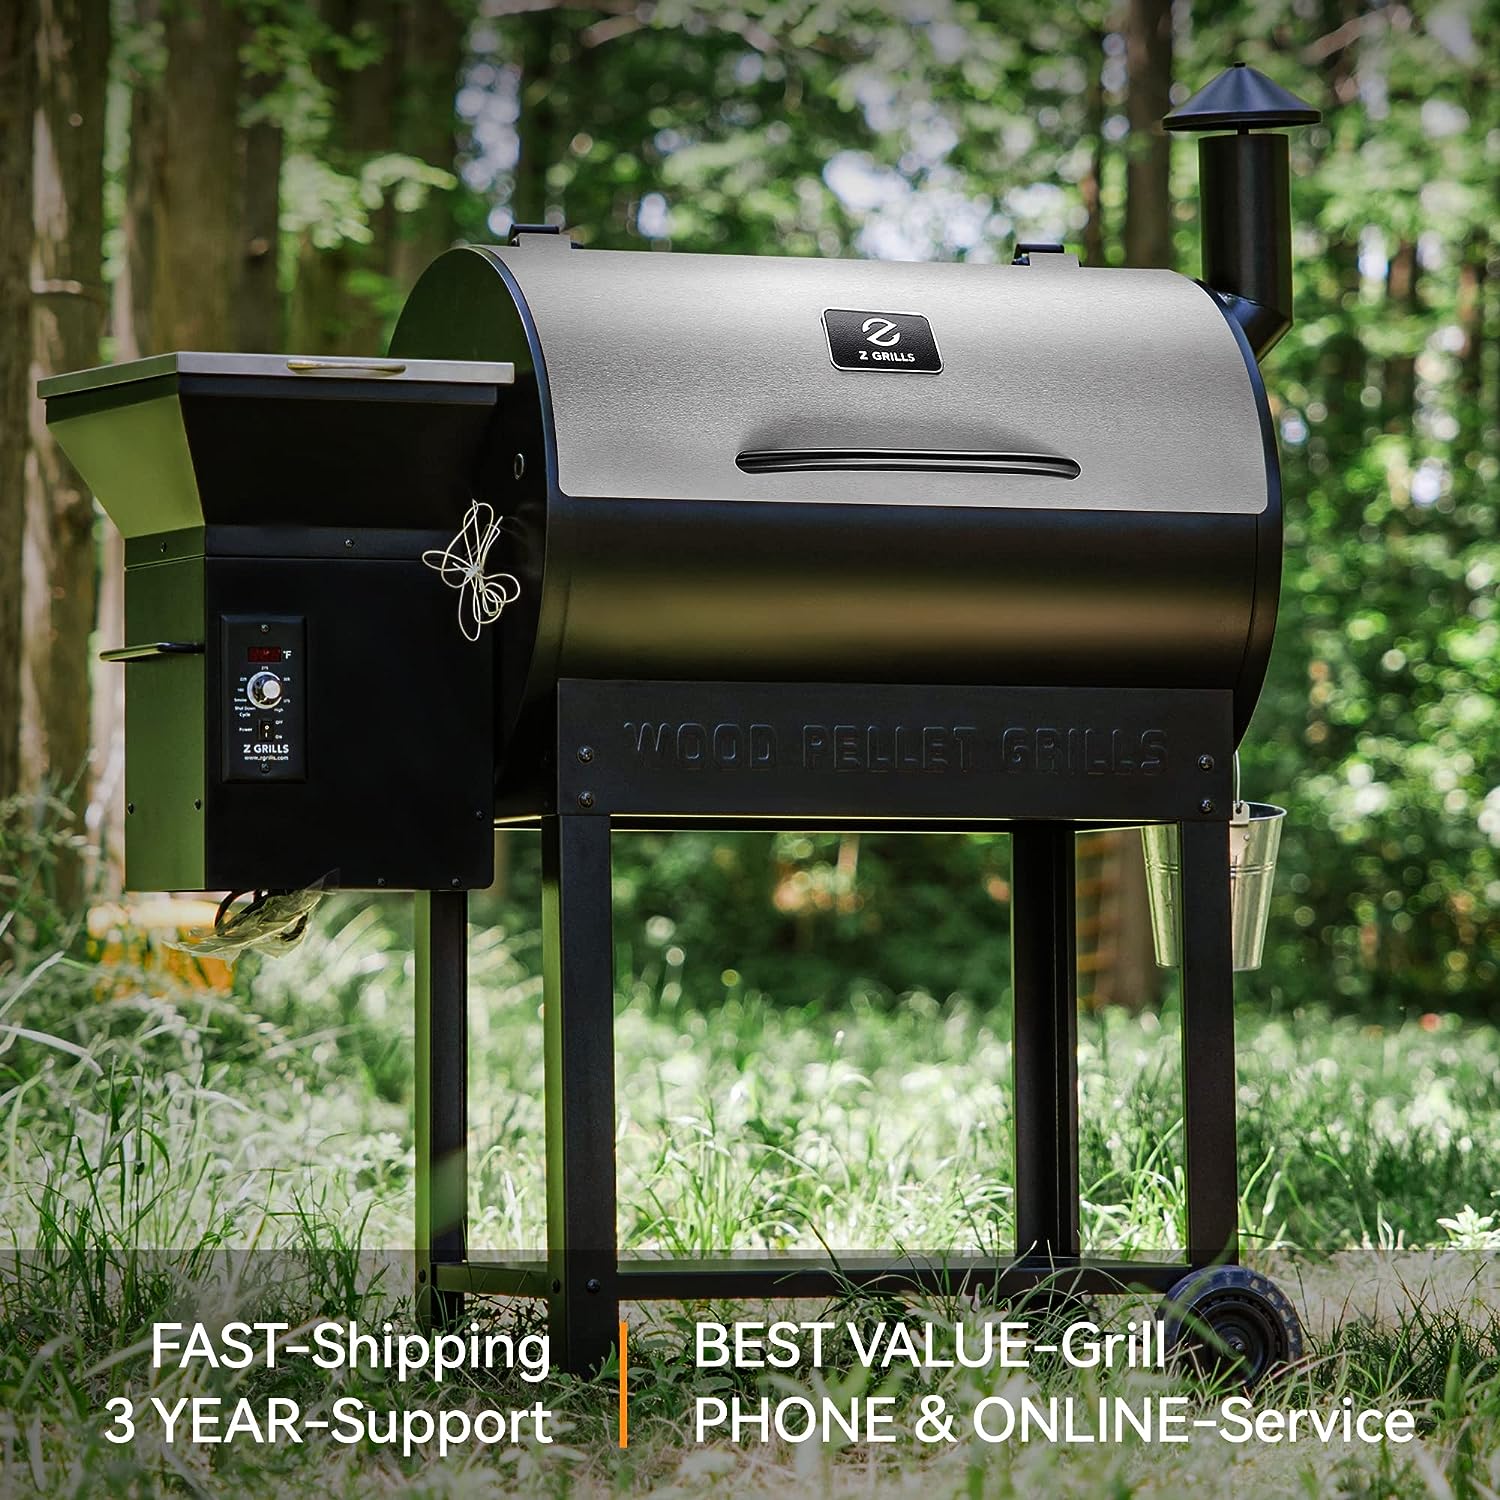 Z GRILLS Wood Pellet Smoker Grill, 8 in 1 BBQ Grill for Outdoor Cooking - $315